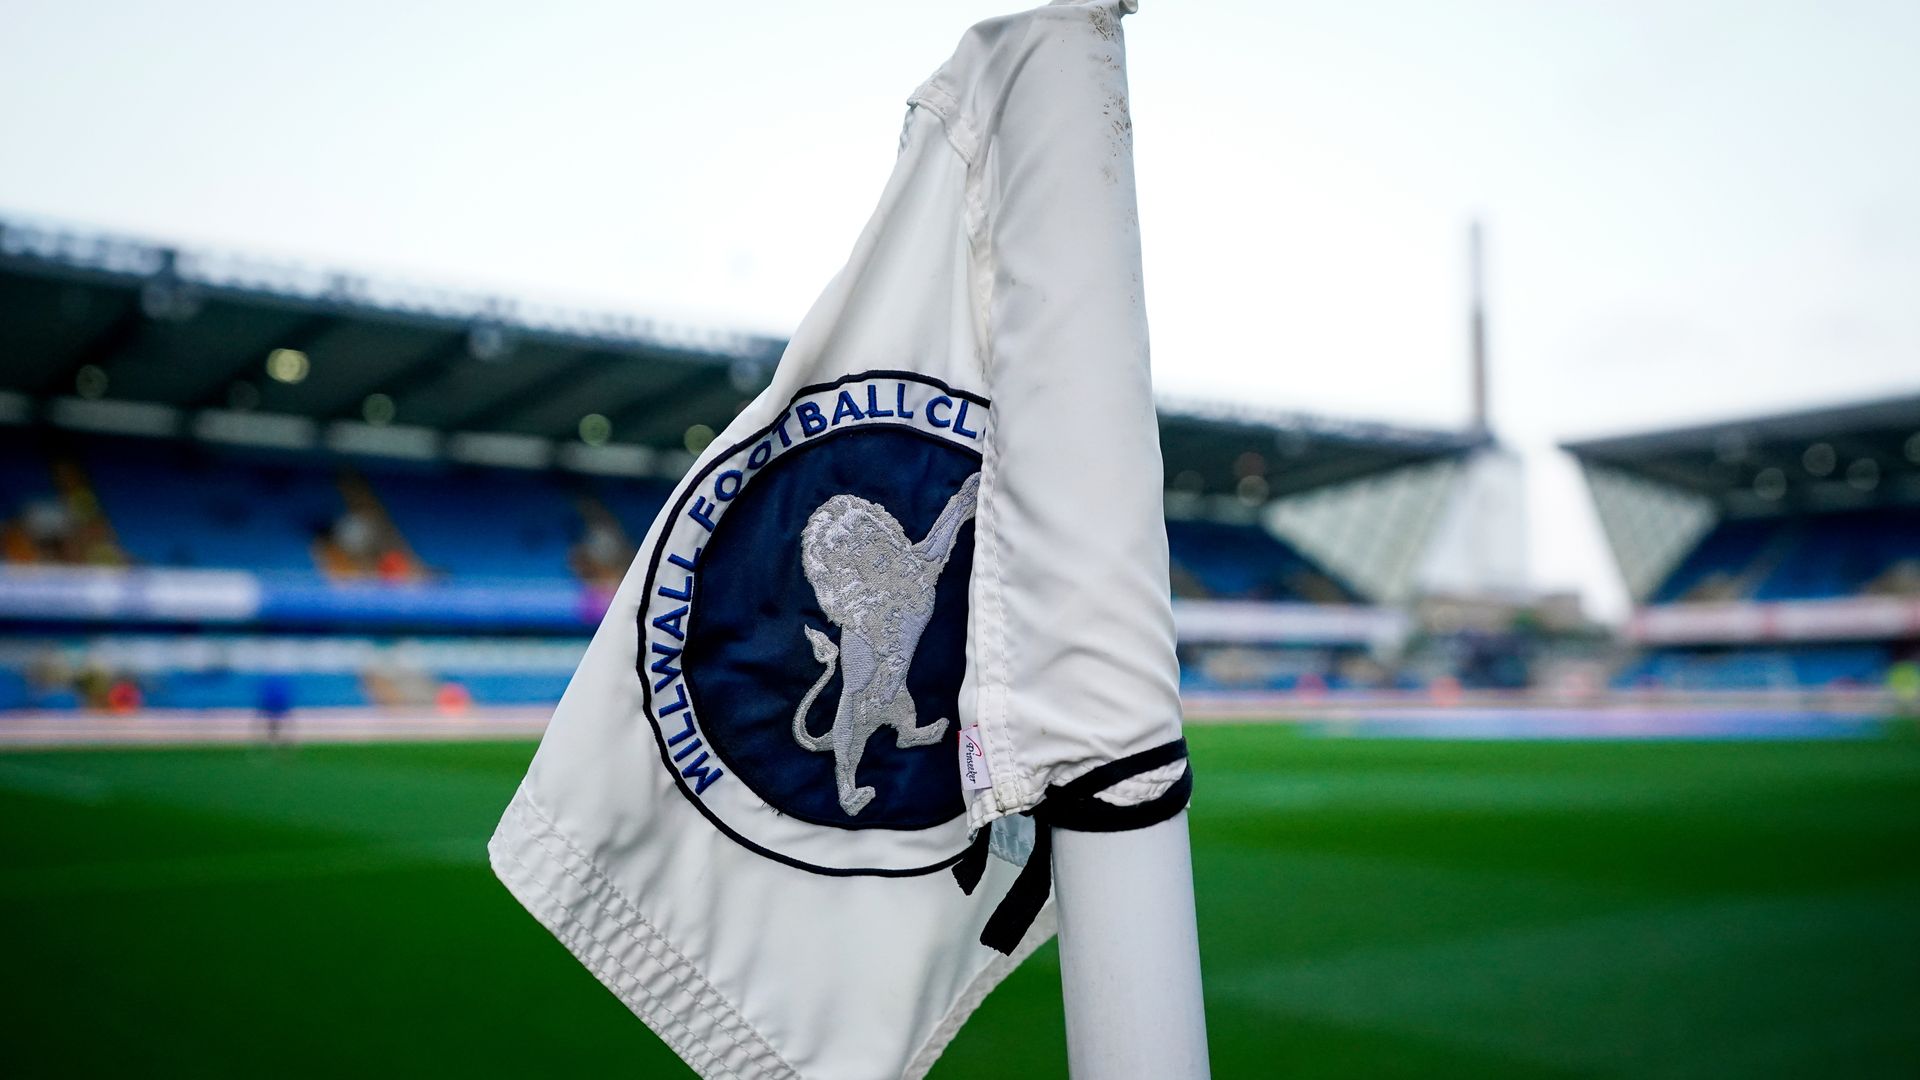 Millwall charged for offensive chants at Wigan